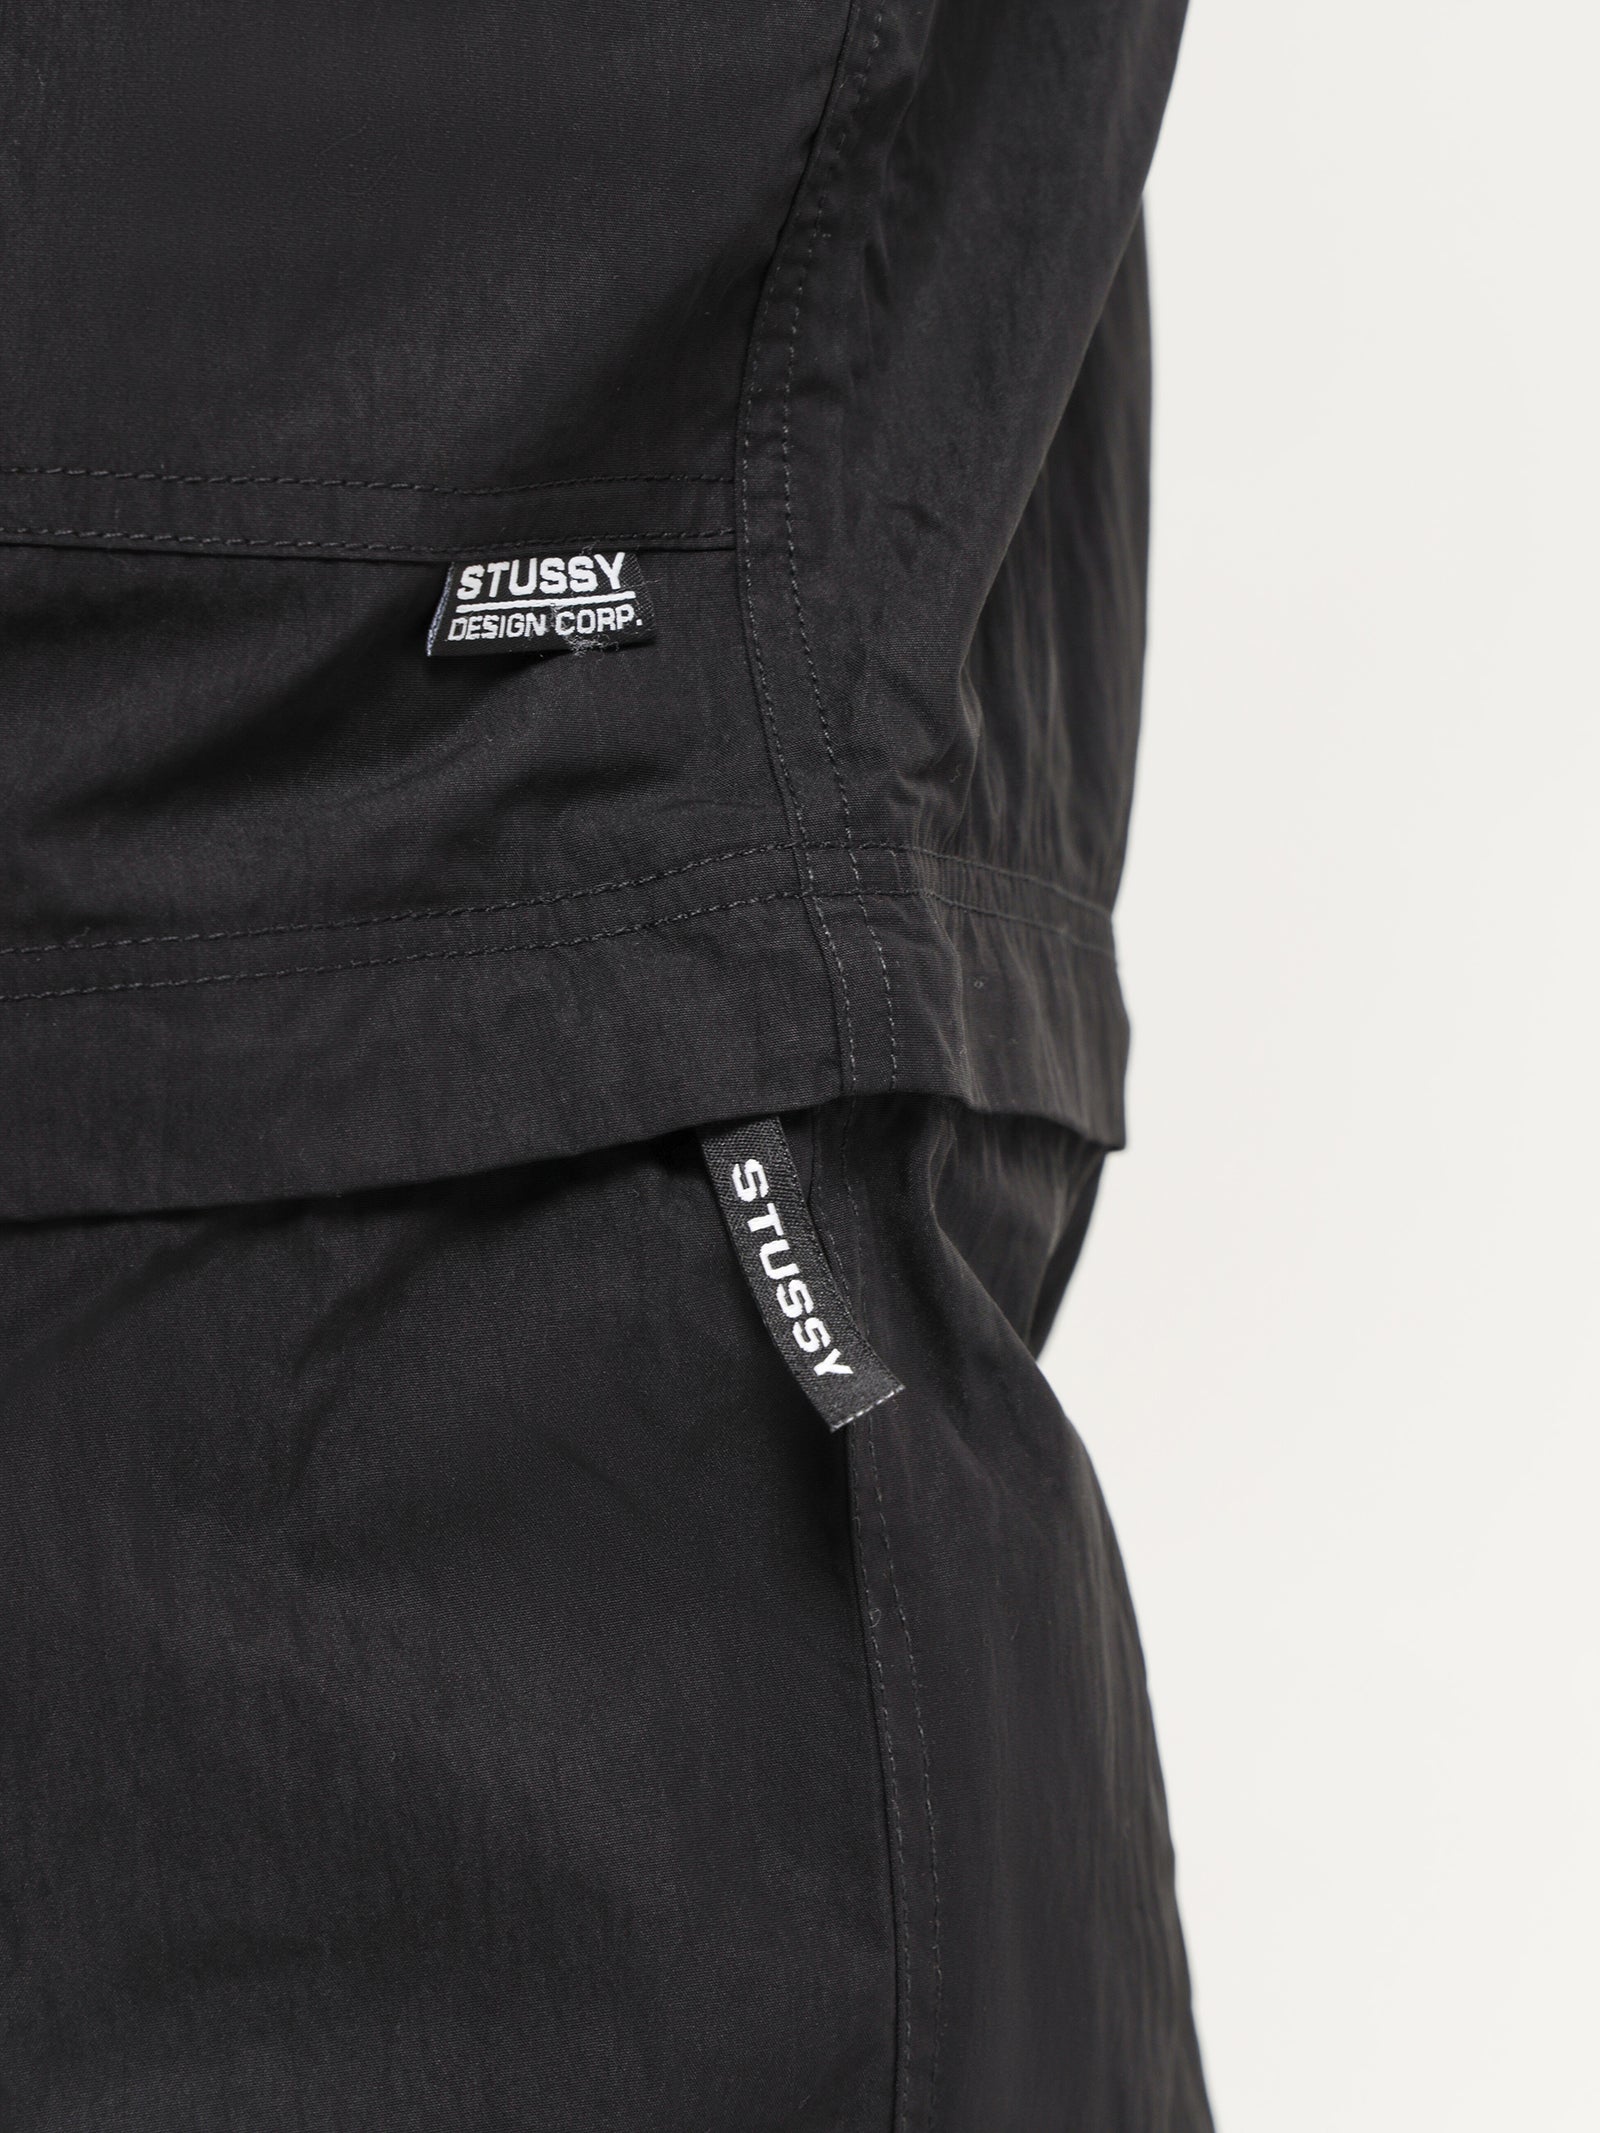 NYCO Convertible Pants in Black